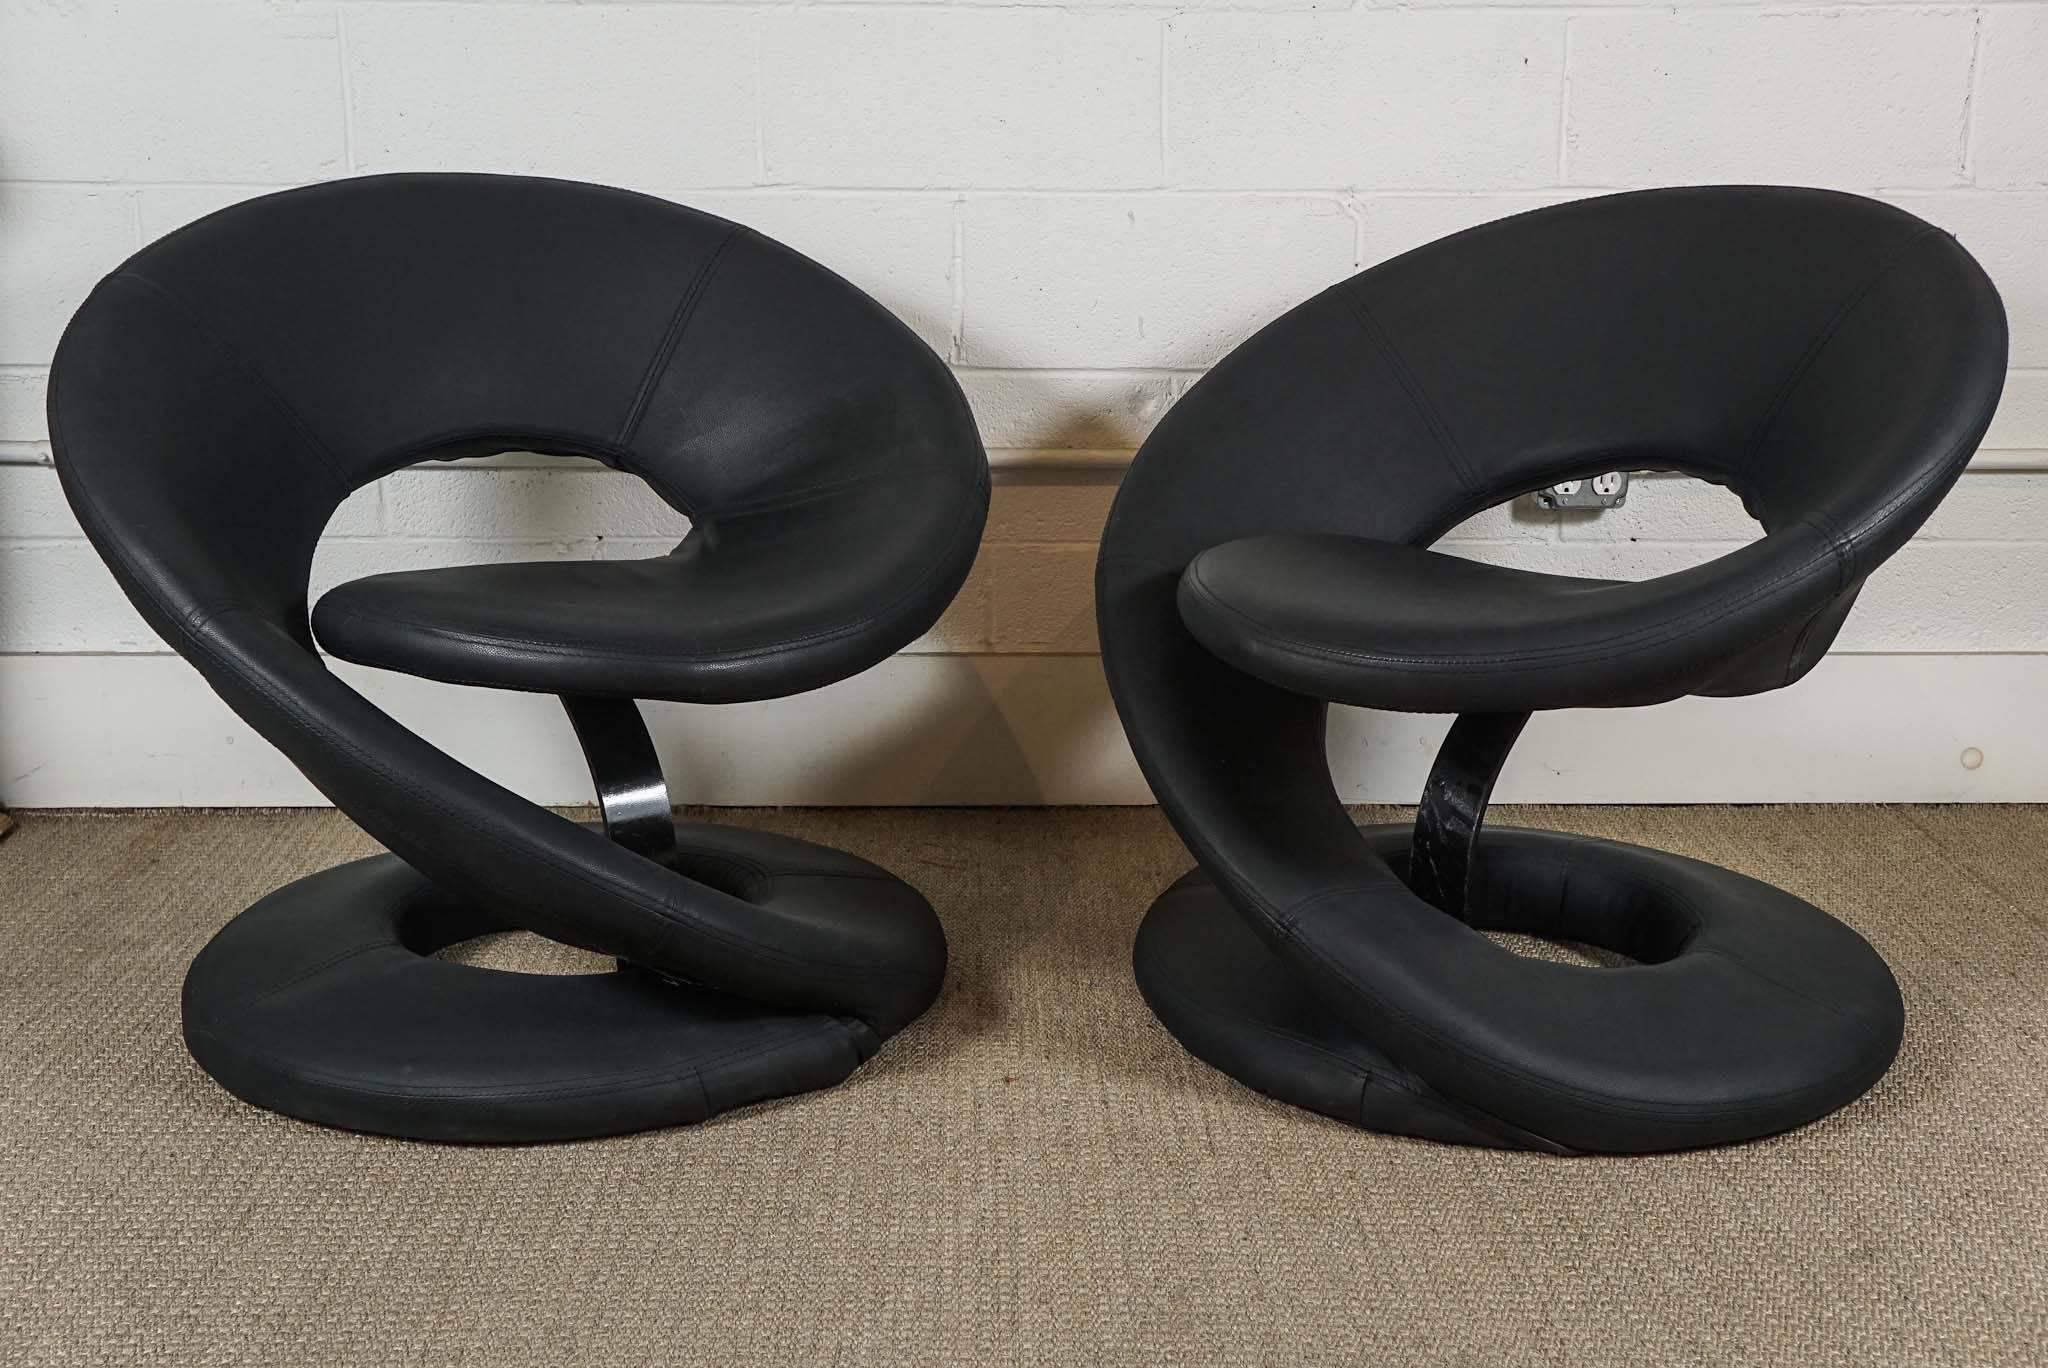 Here is a great pair of spiral lounge chairs in a black faux leather in the style of Louis Durot. The chairs are very comfortable as conversation chairs.